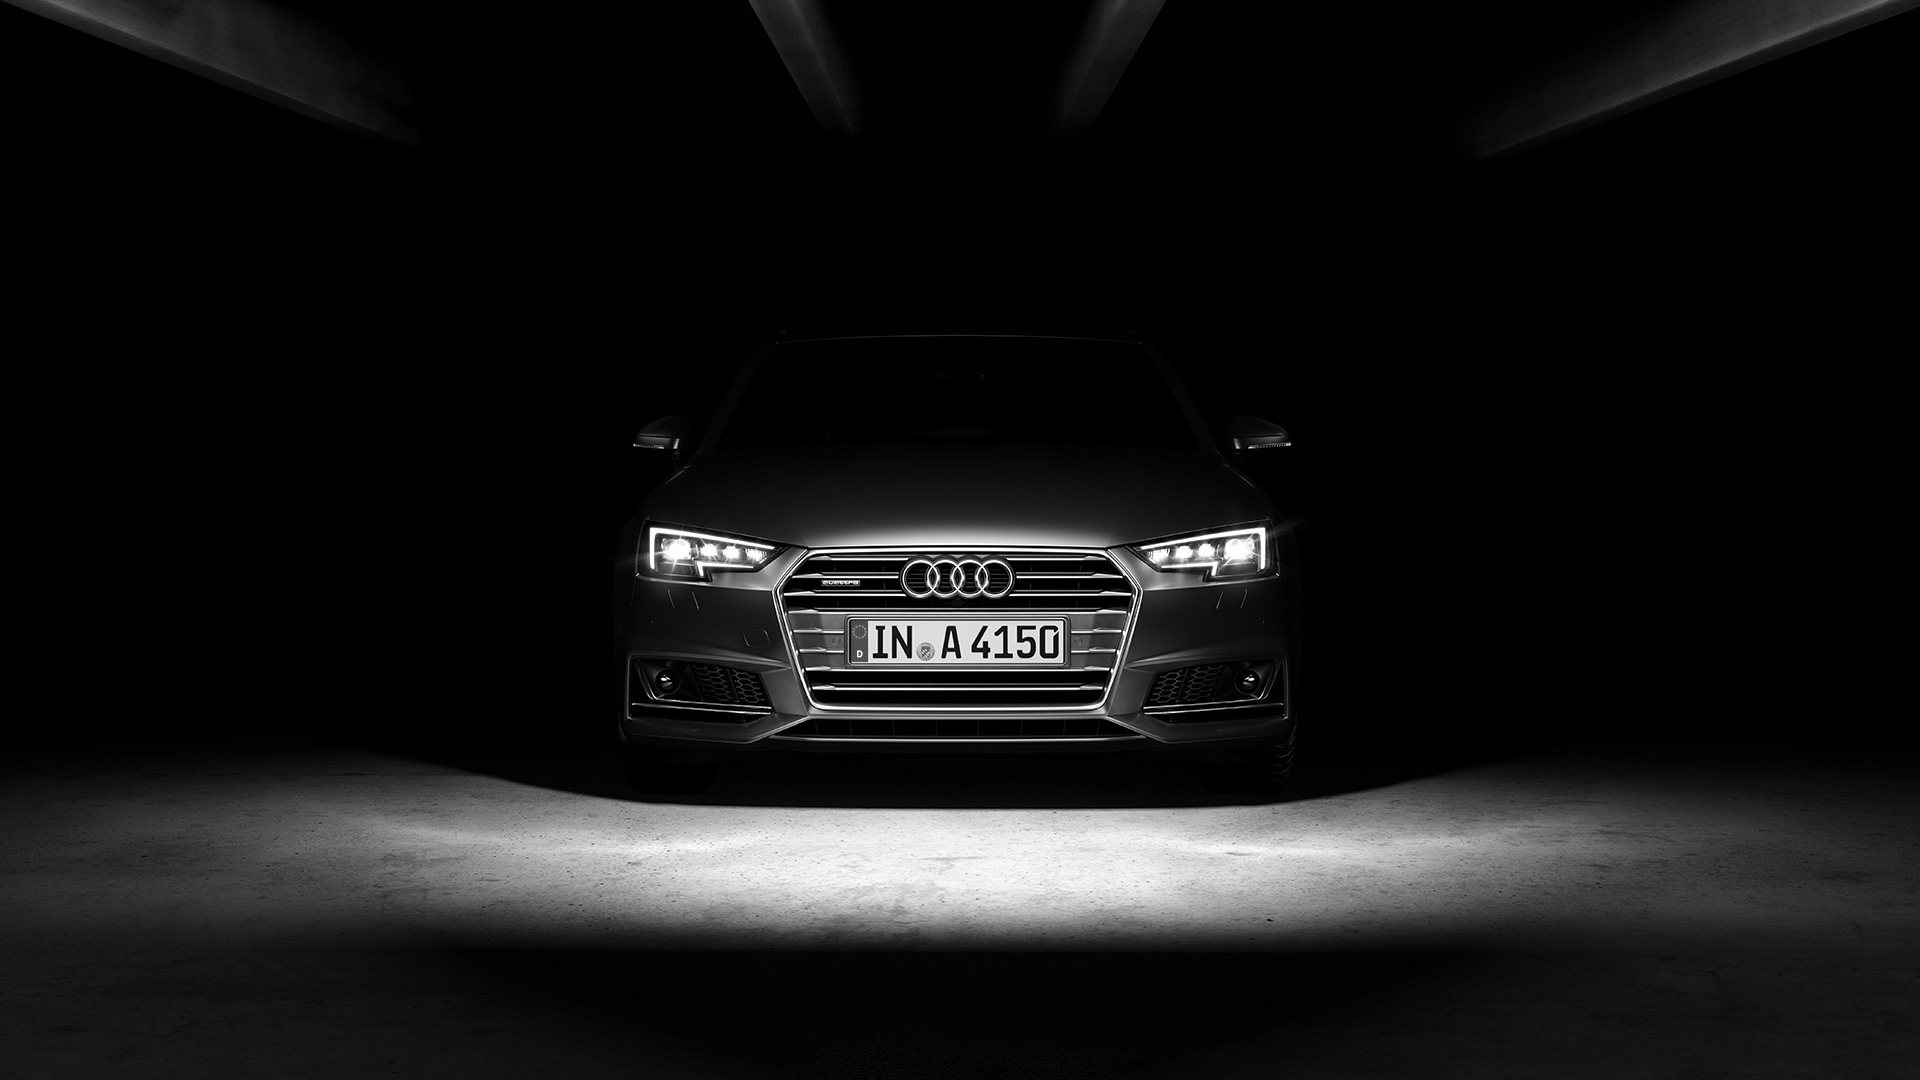 Audi A4 2017 Wallpapers